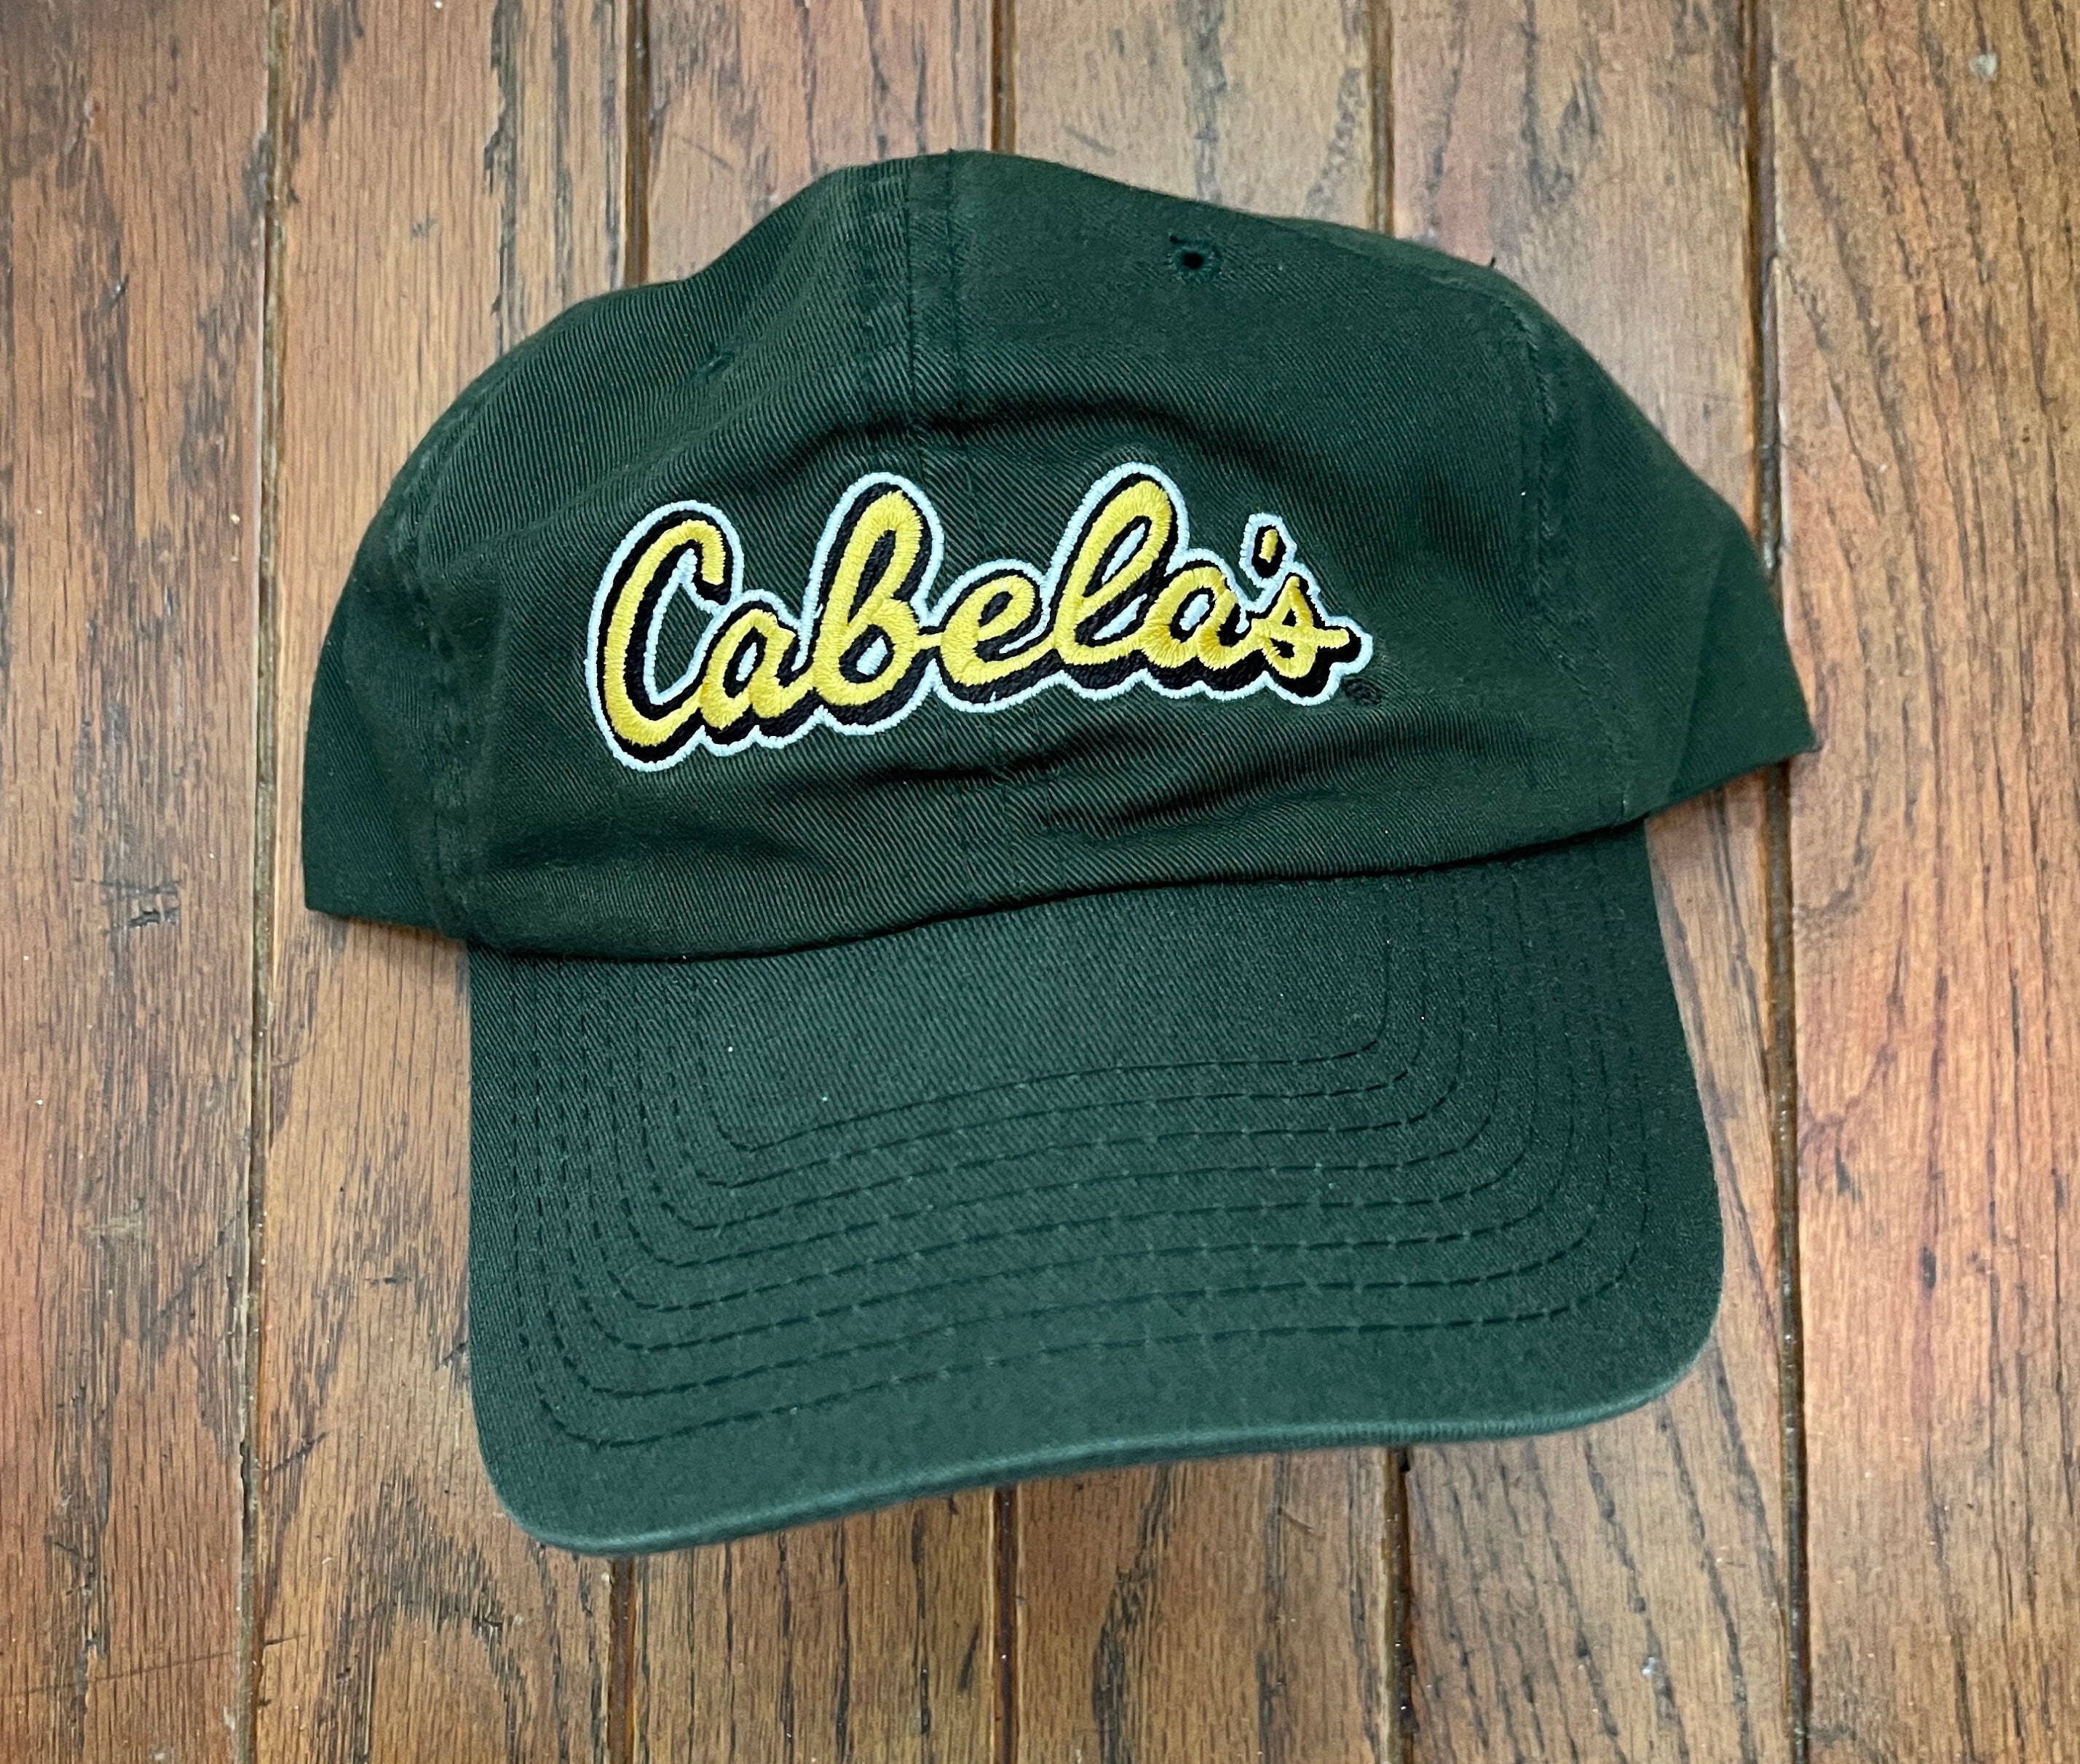 Vintage 90s Unstructured Strapback Hat Baseball Cap Cabela's Hunting Outdoor Outfitters Camping Fishing